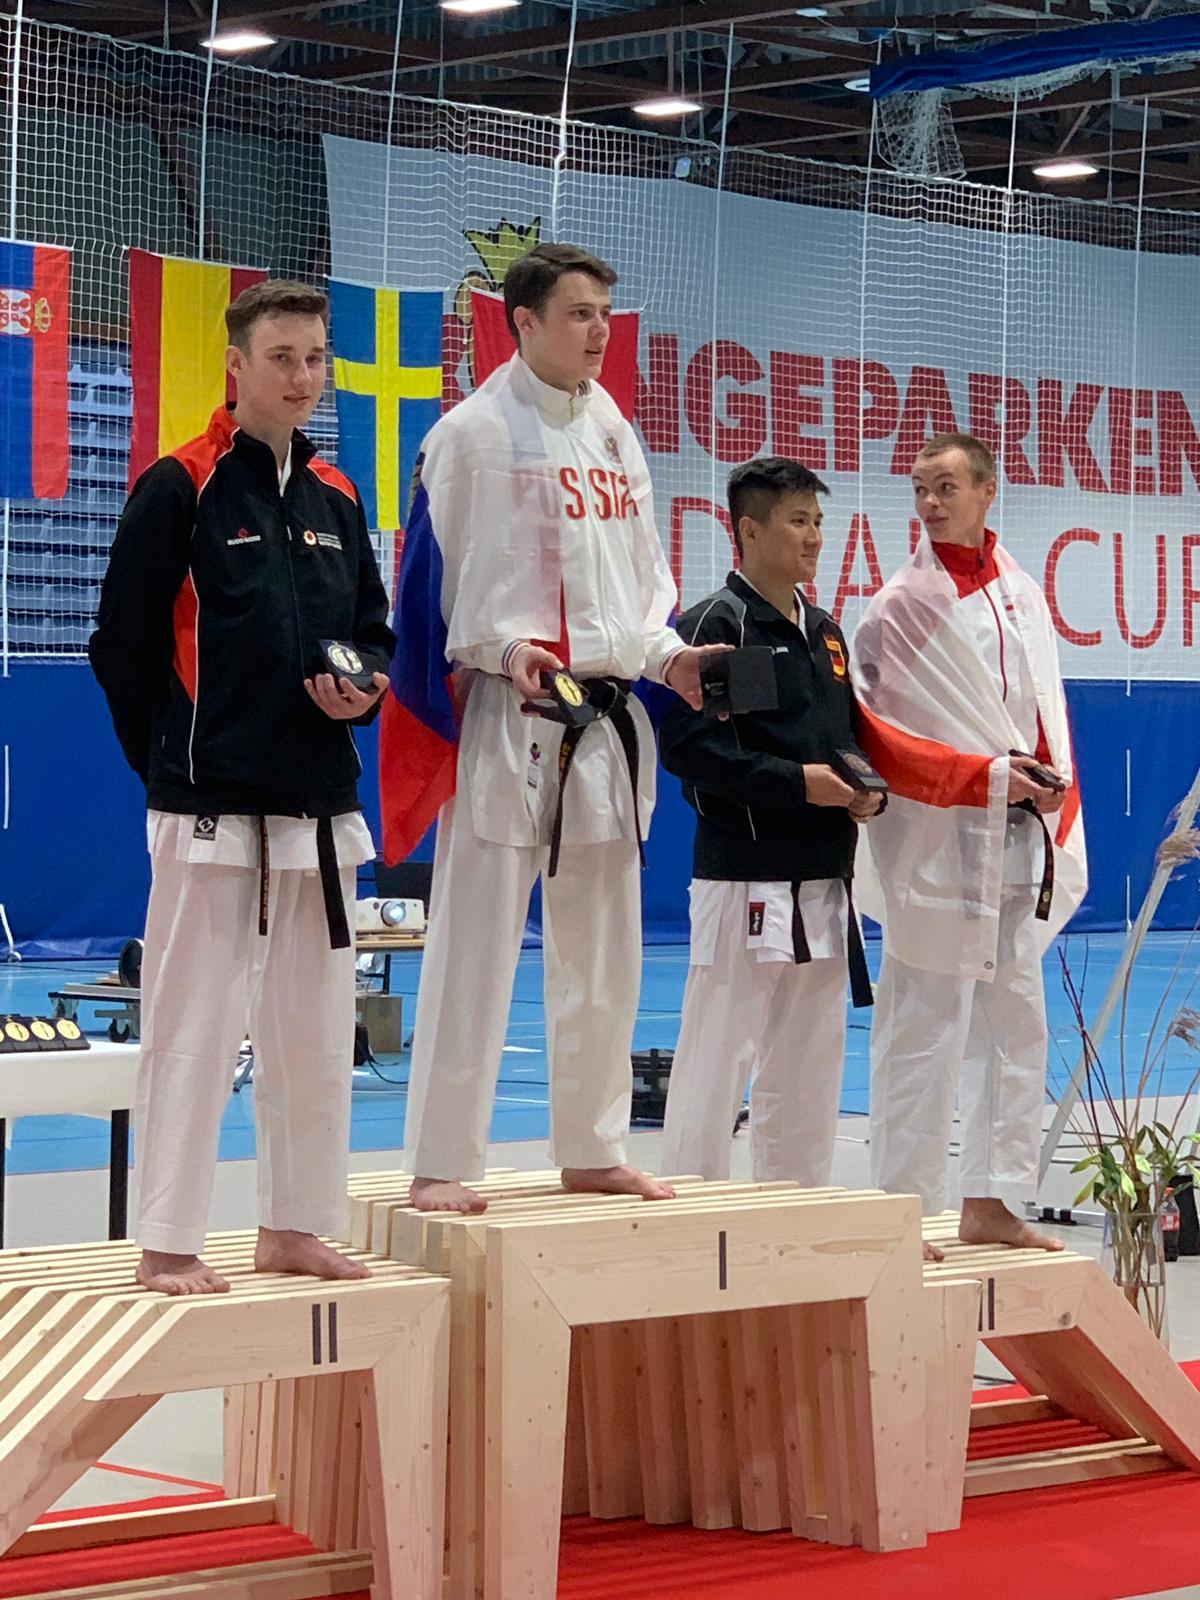 You are currently viewing JKA Europacup 2019 in Stavanger